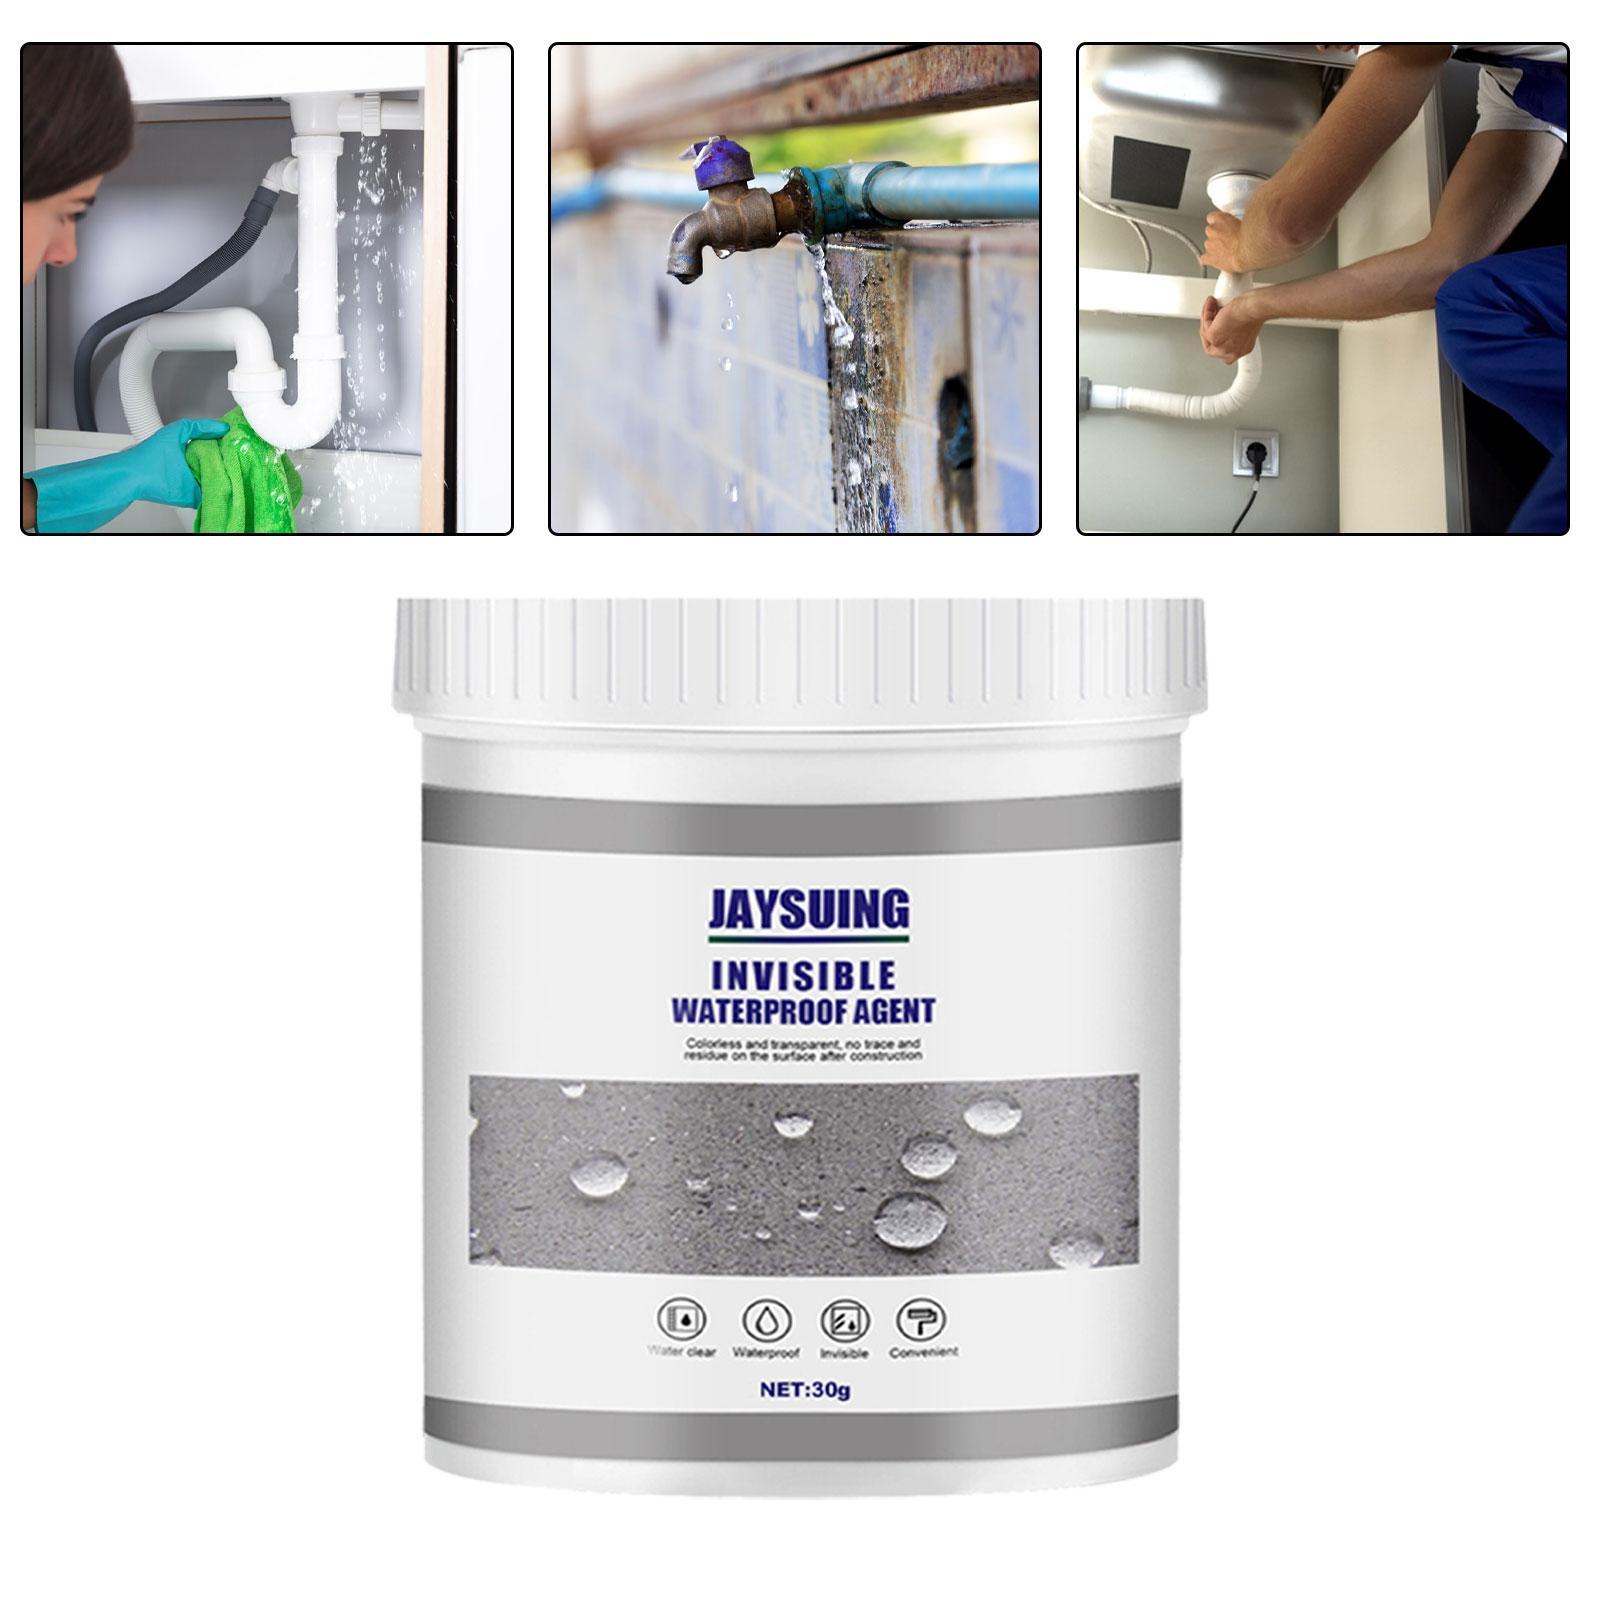 Waterproof Sealant Agent Leakproof Glue Invisible Toilet Glue Repair Sealant Leak trapping Tools